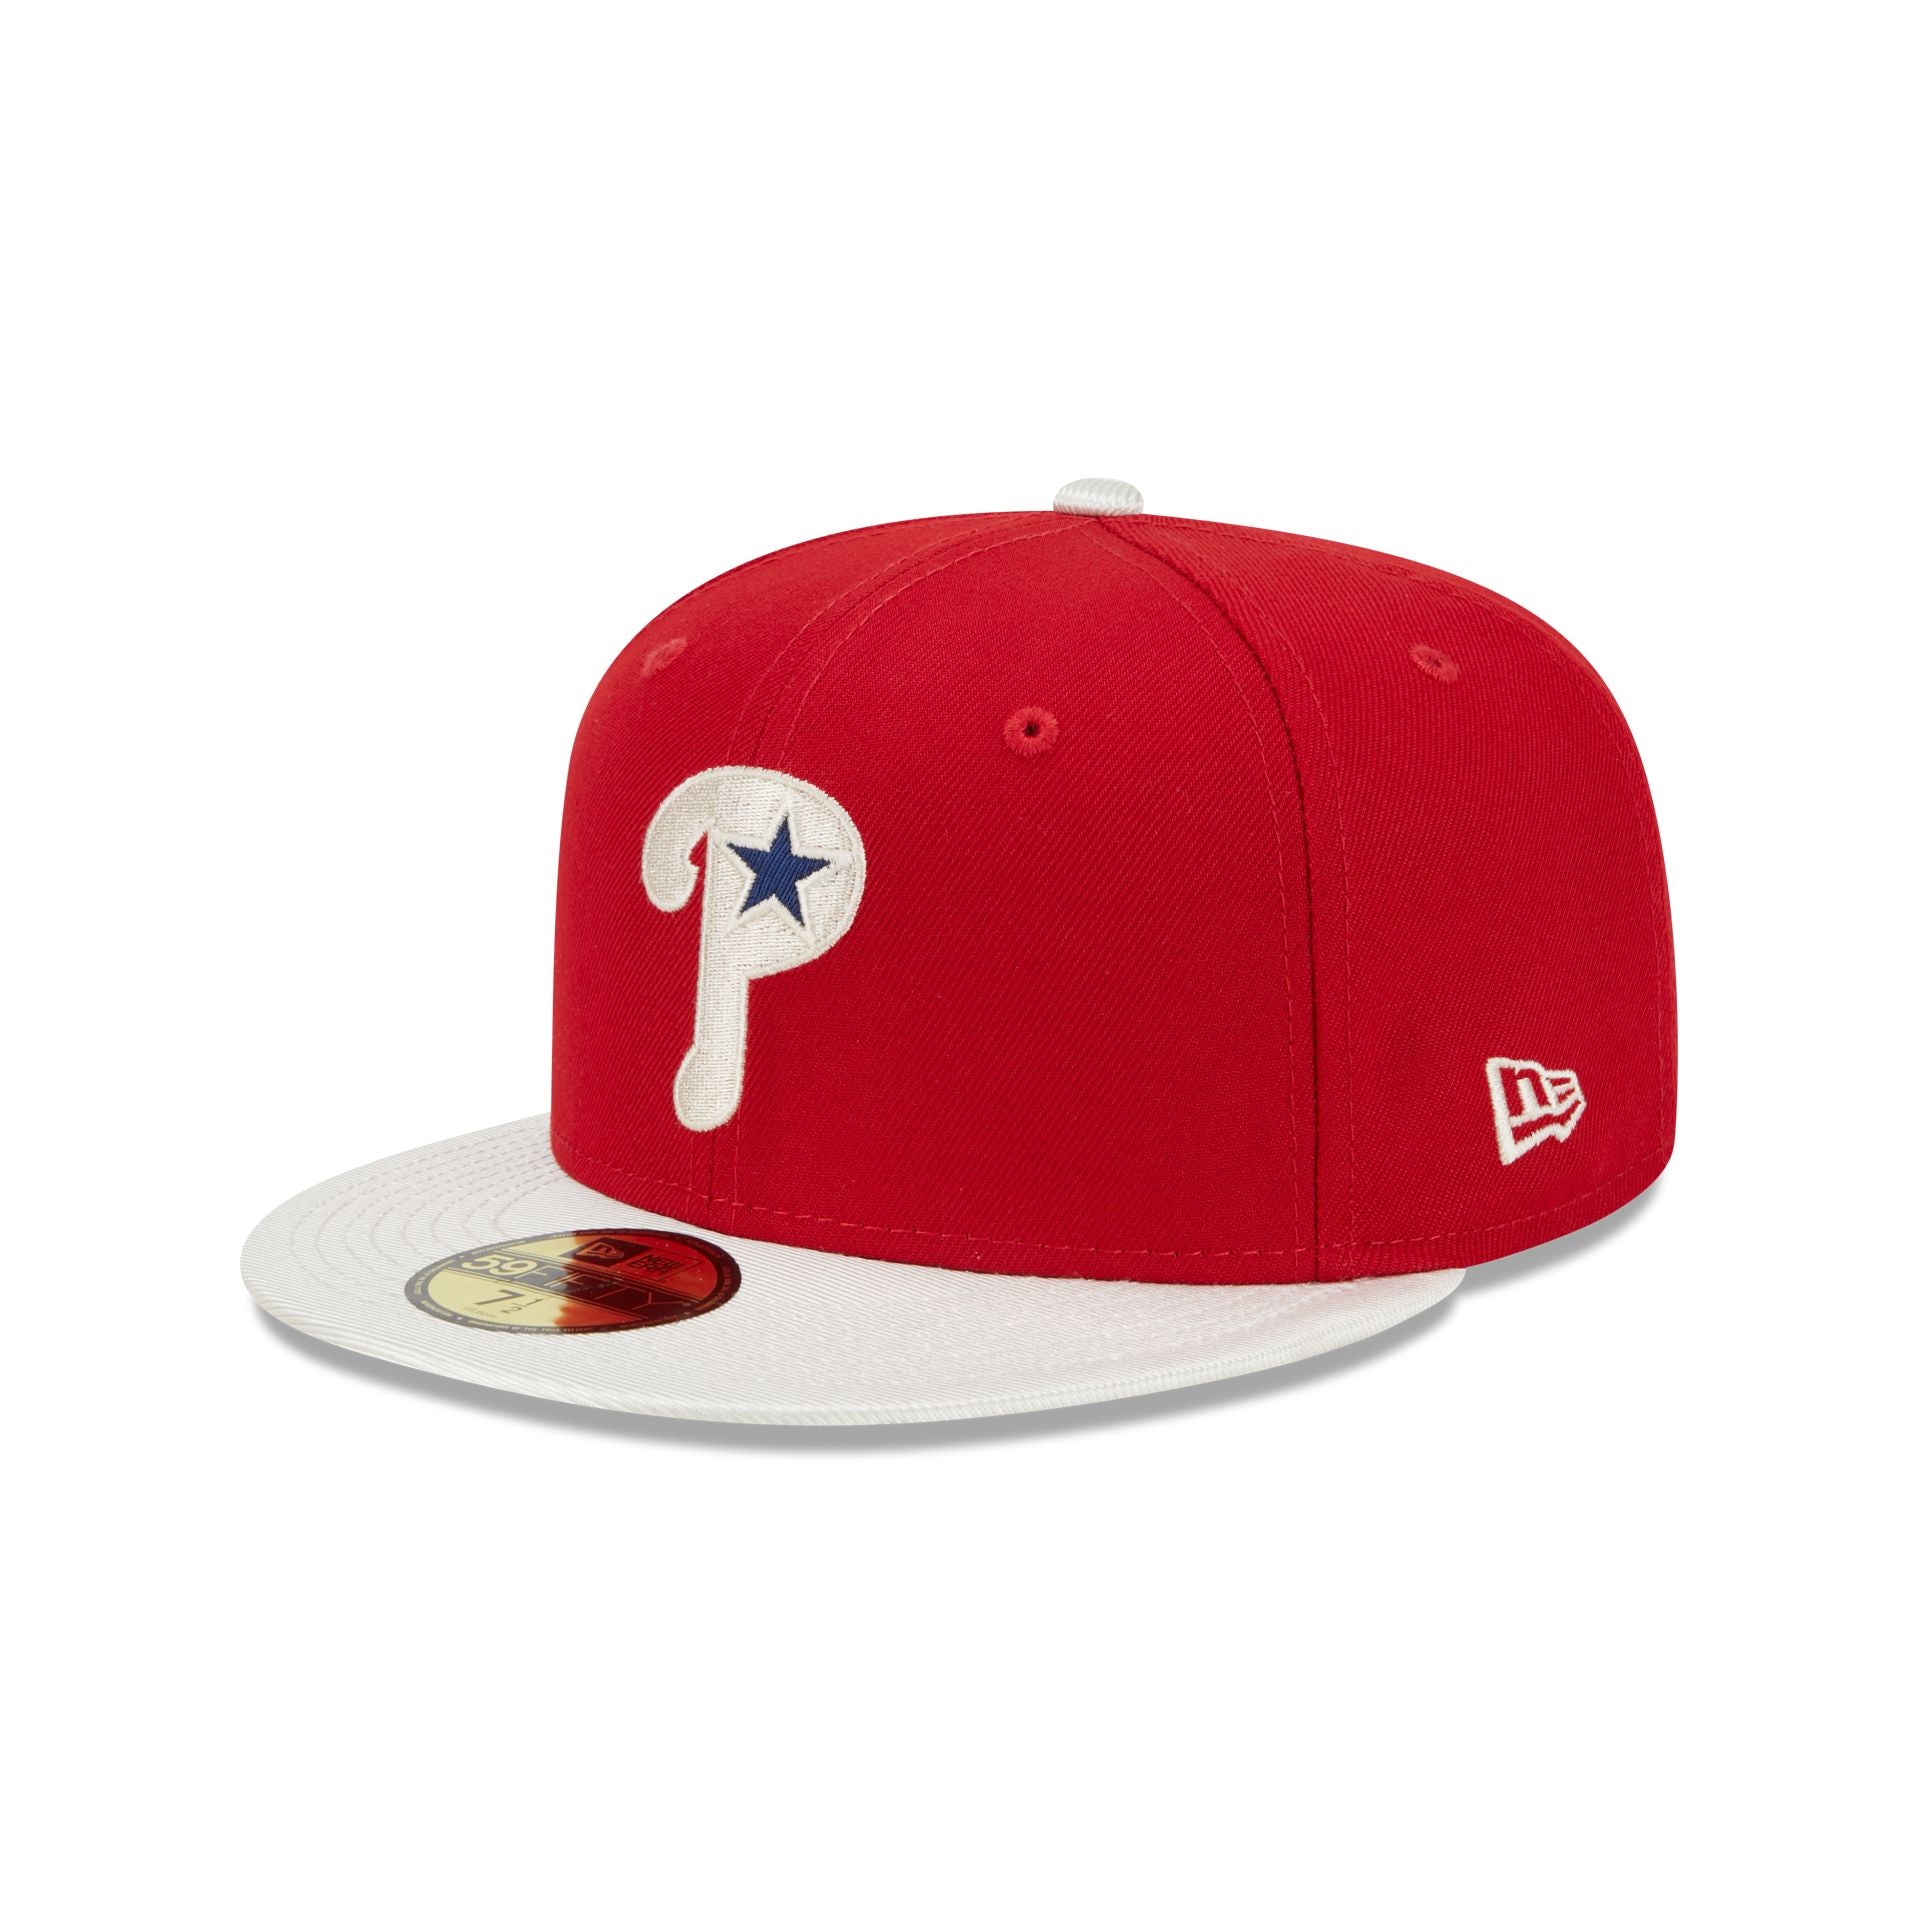 Philadelphia Phillies Team Shimmer 59FIFTY Fitted Hat, Red - Size: 8, MLB by New Era